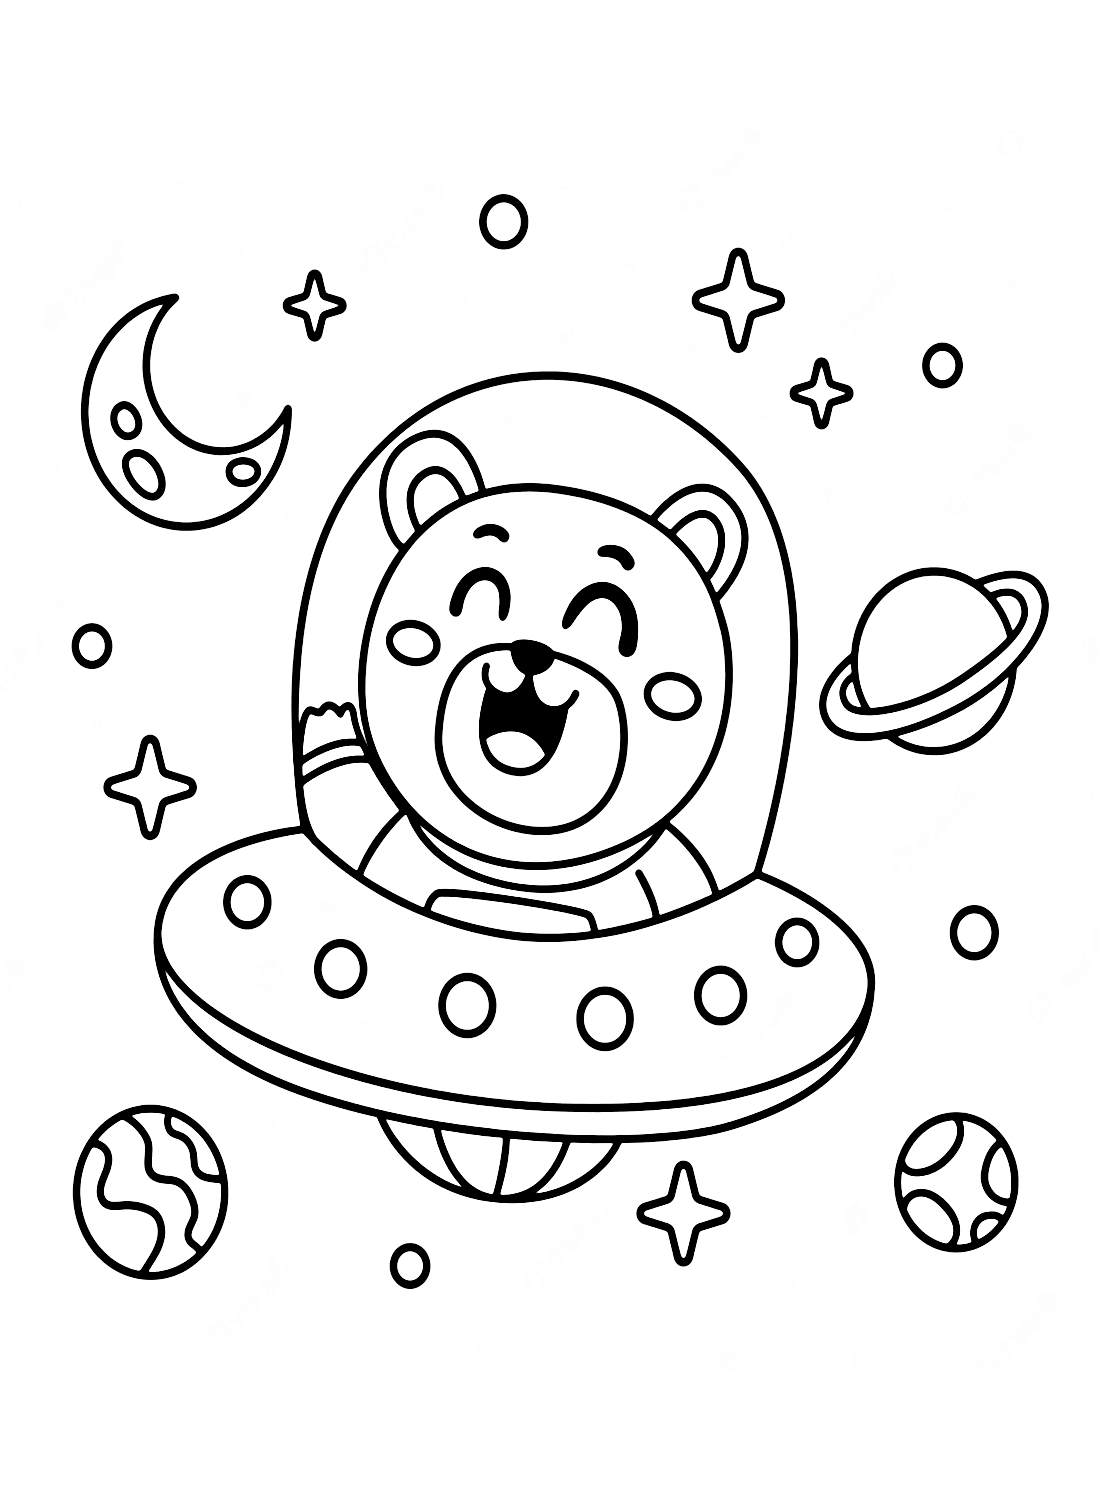 Crayola Coloring Pages Free from Crayola